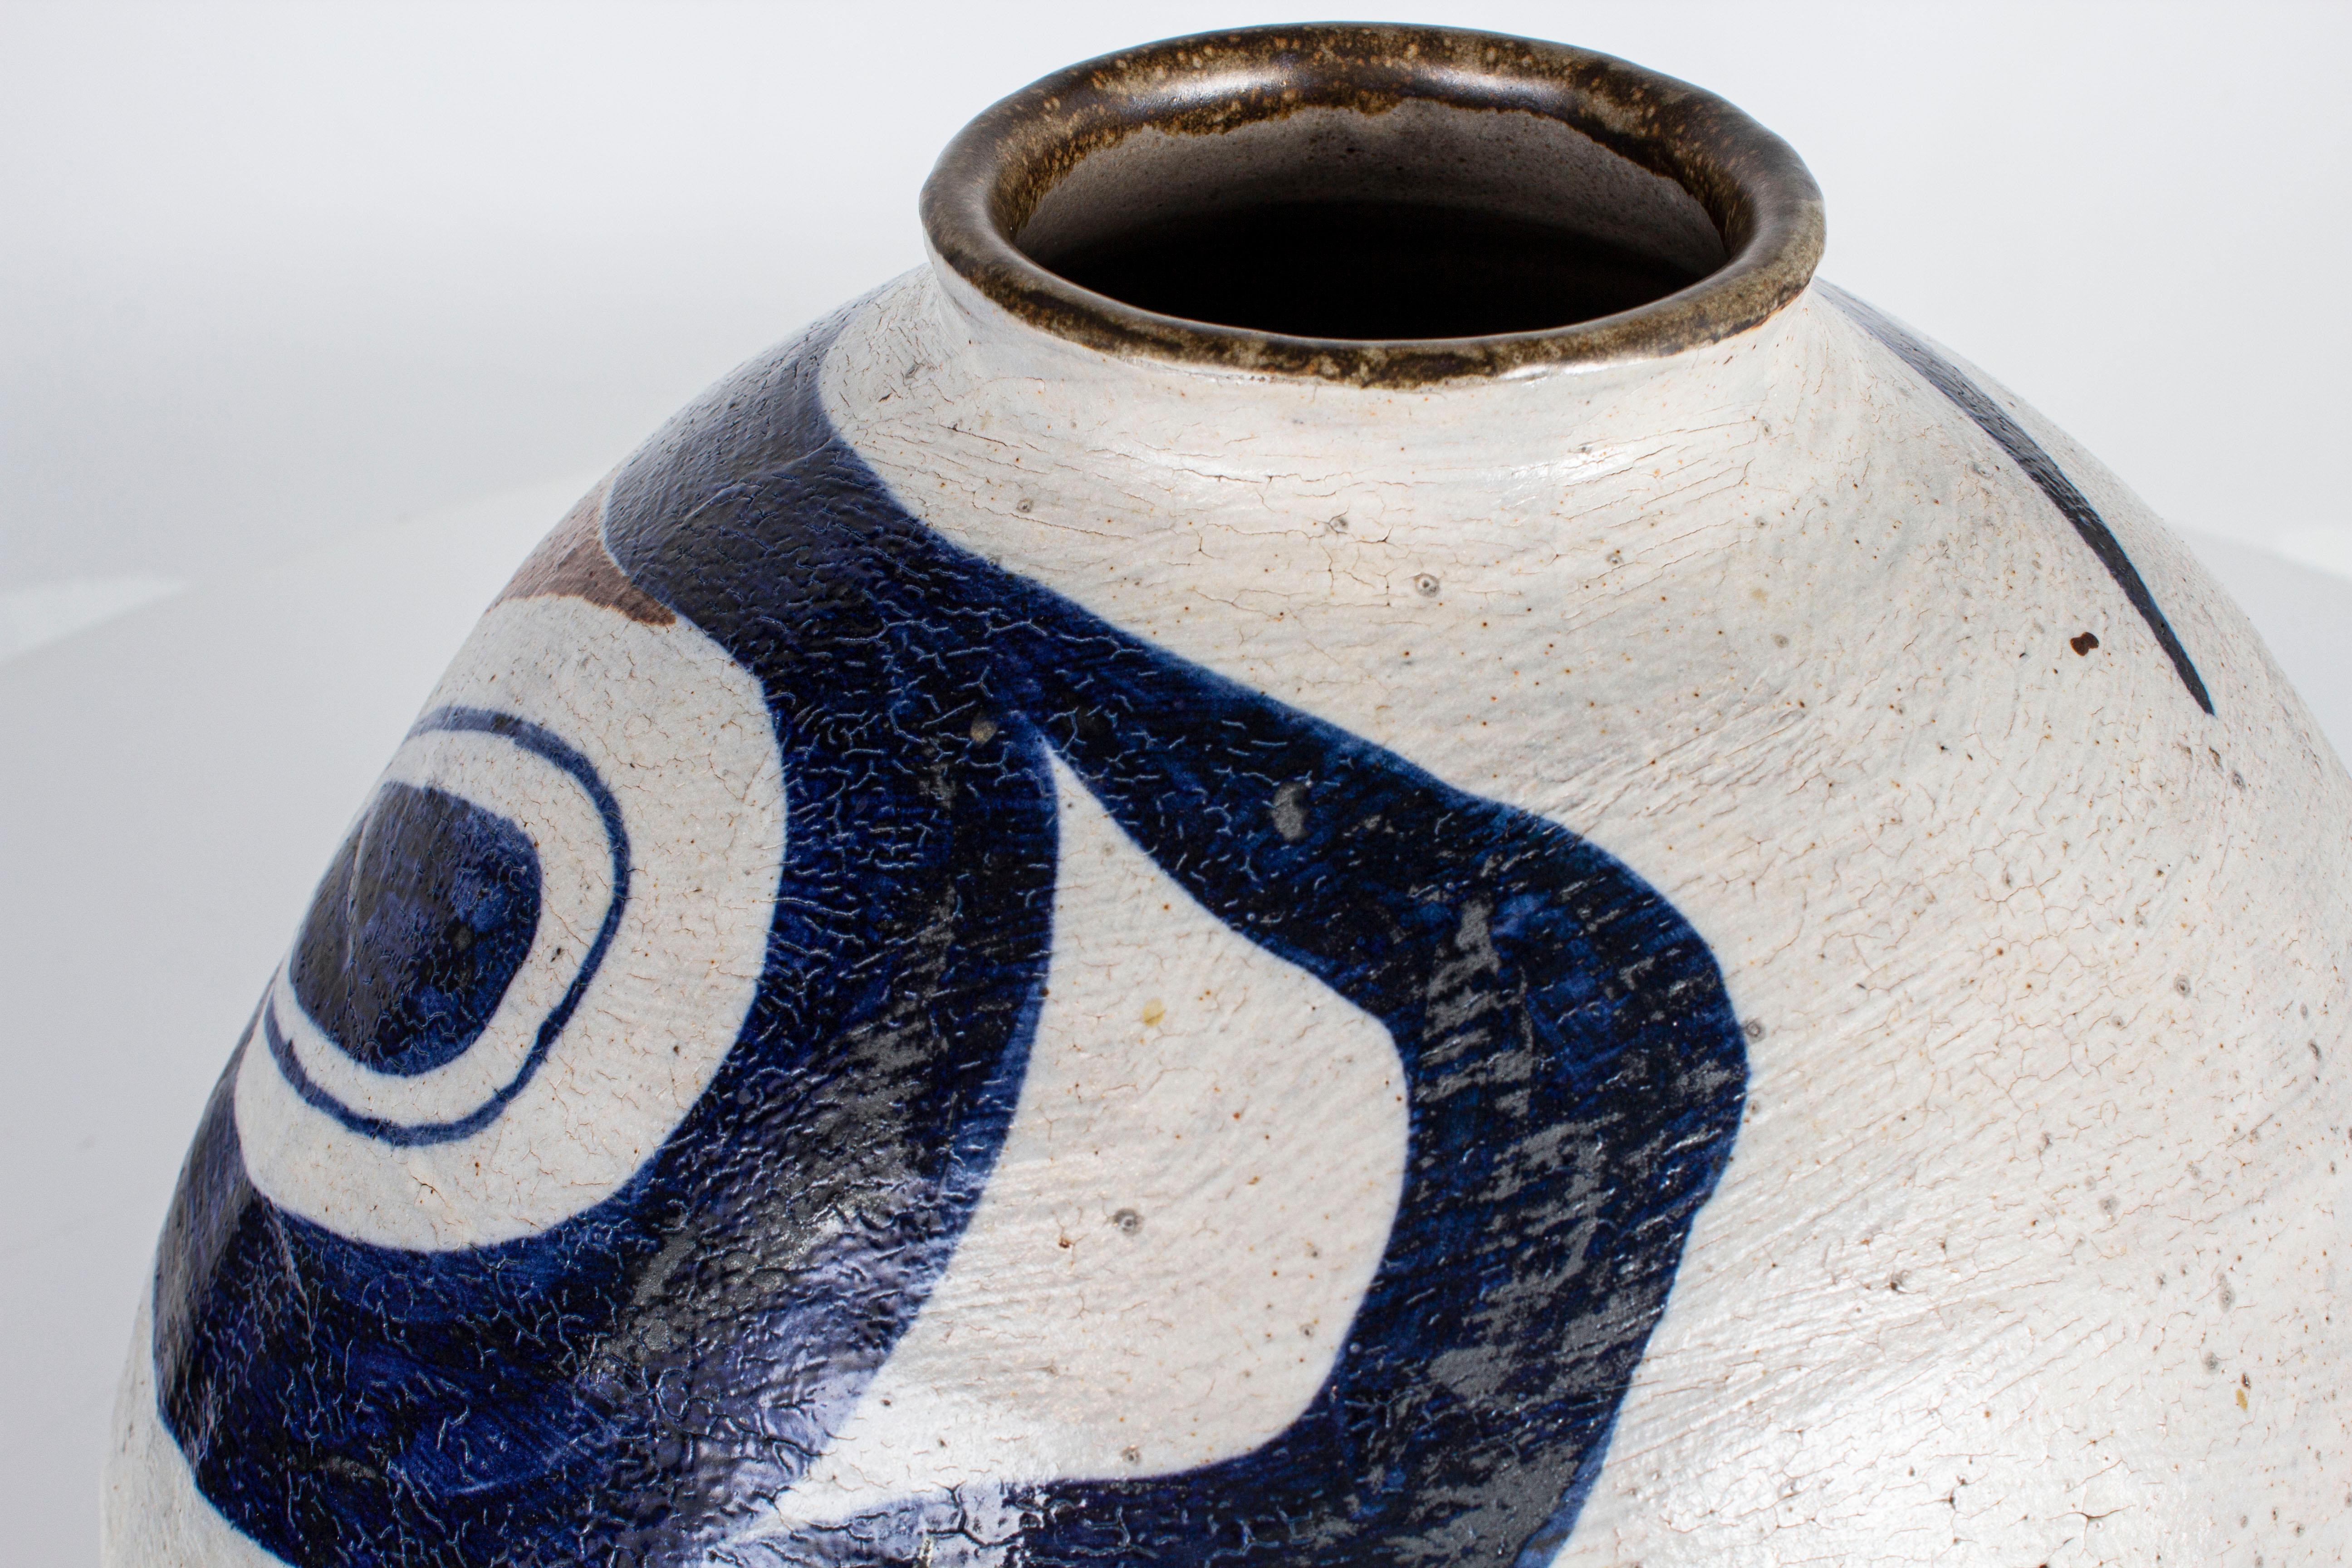 Bohemian White and Blue Pottery